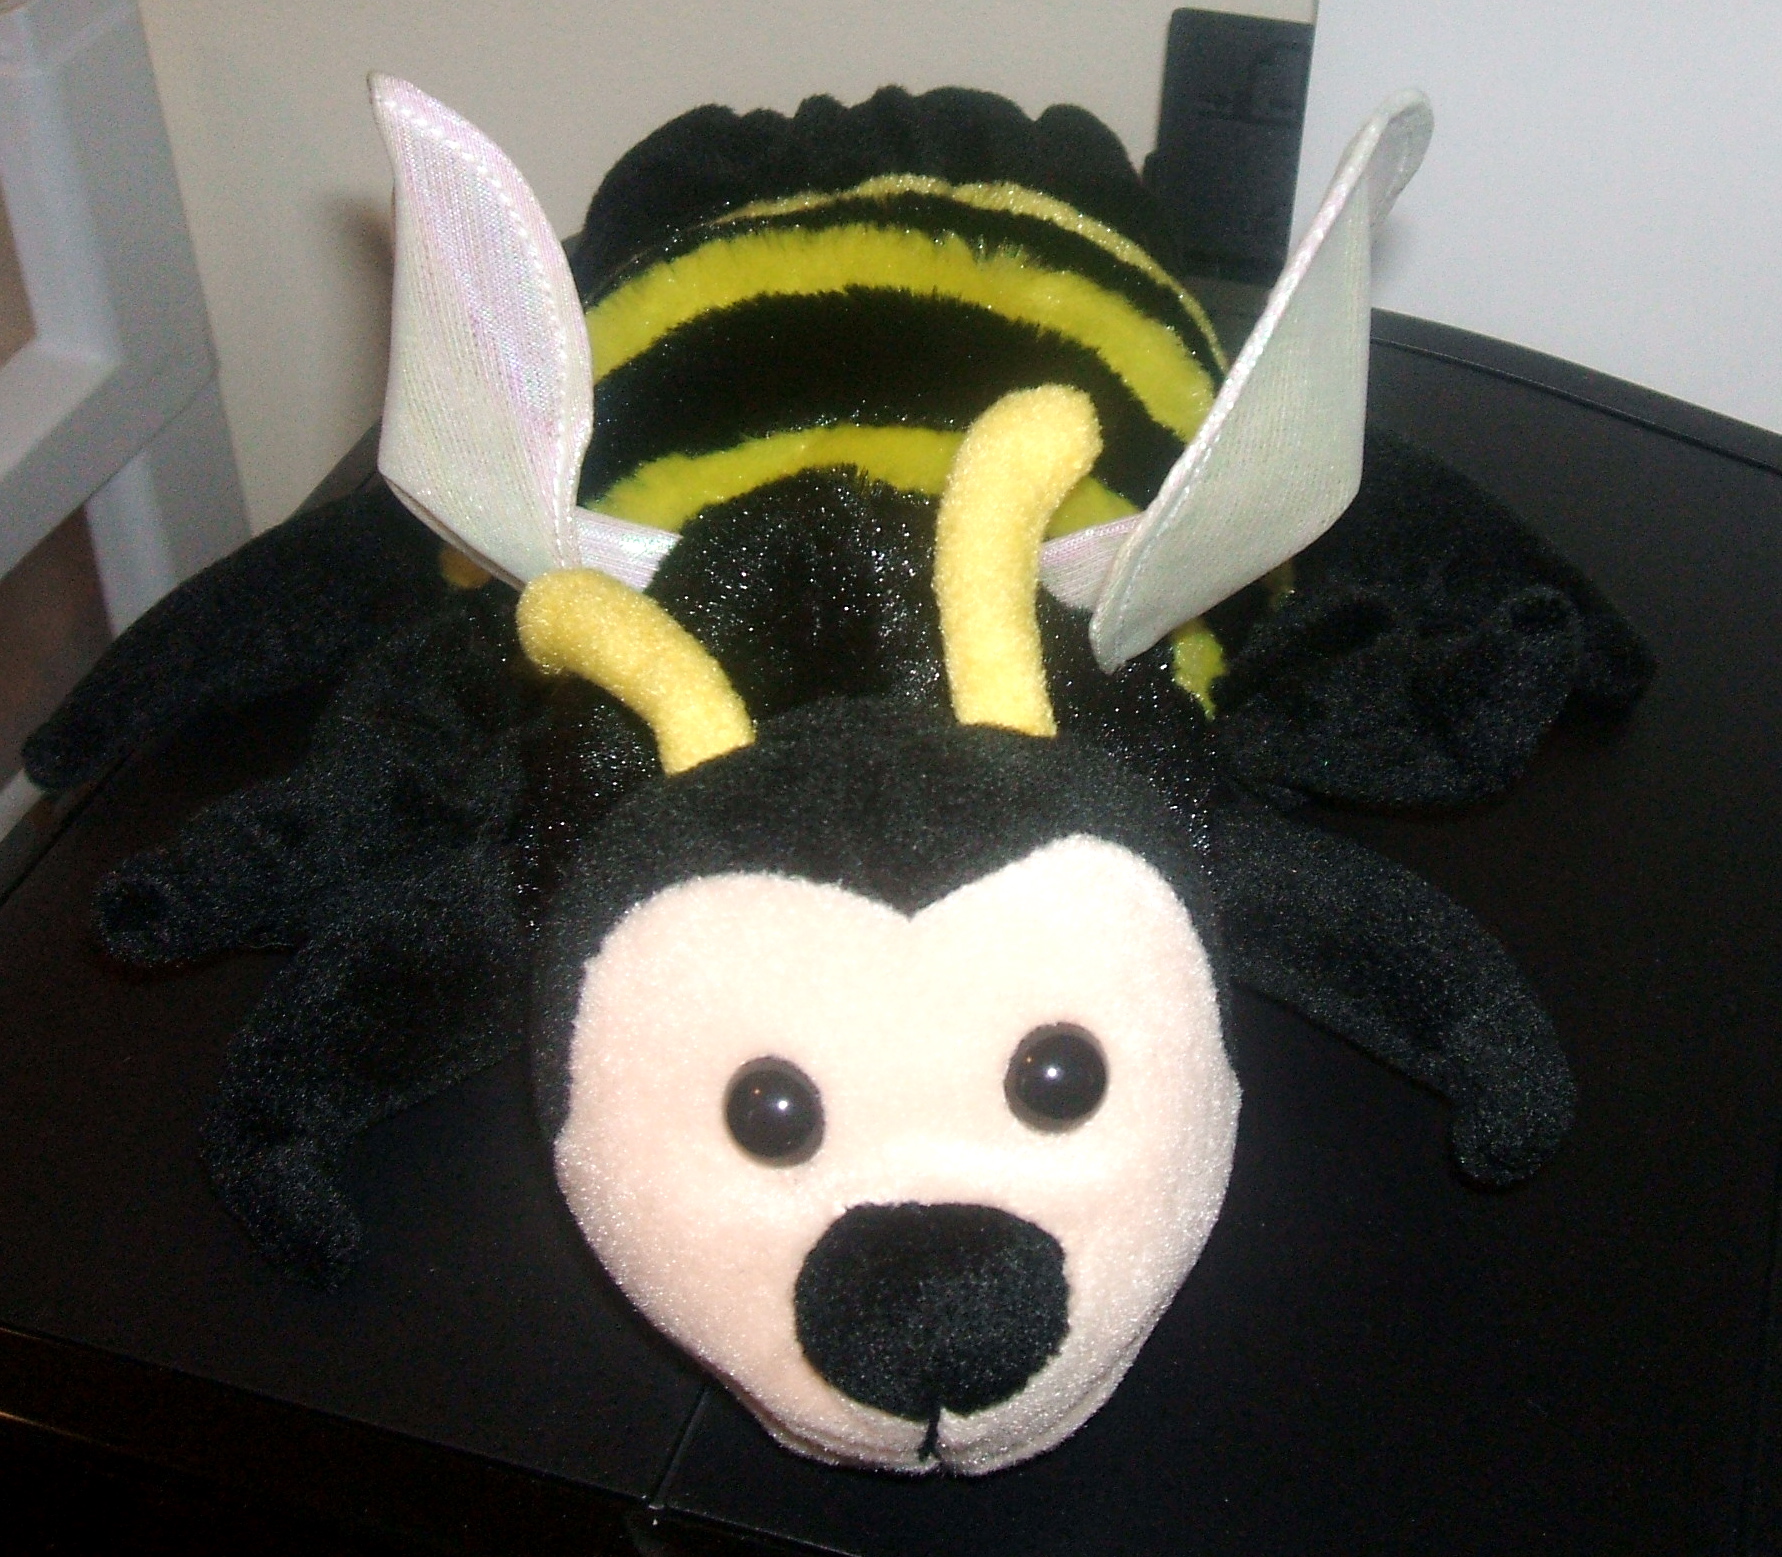 Bumble bee [hand puppet]